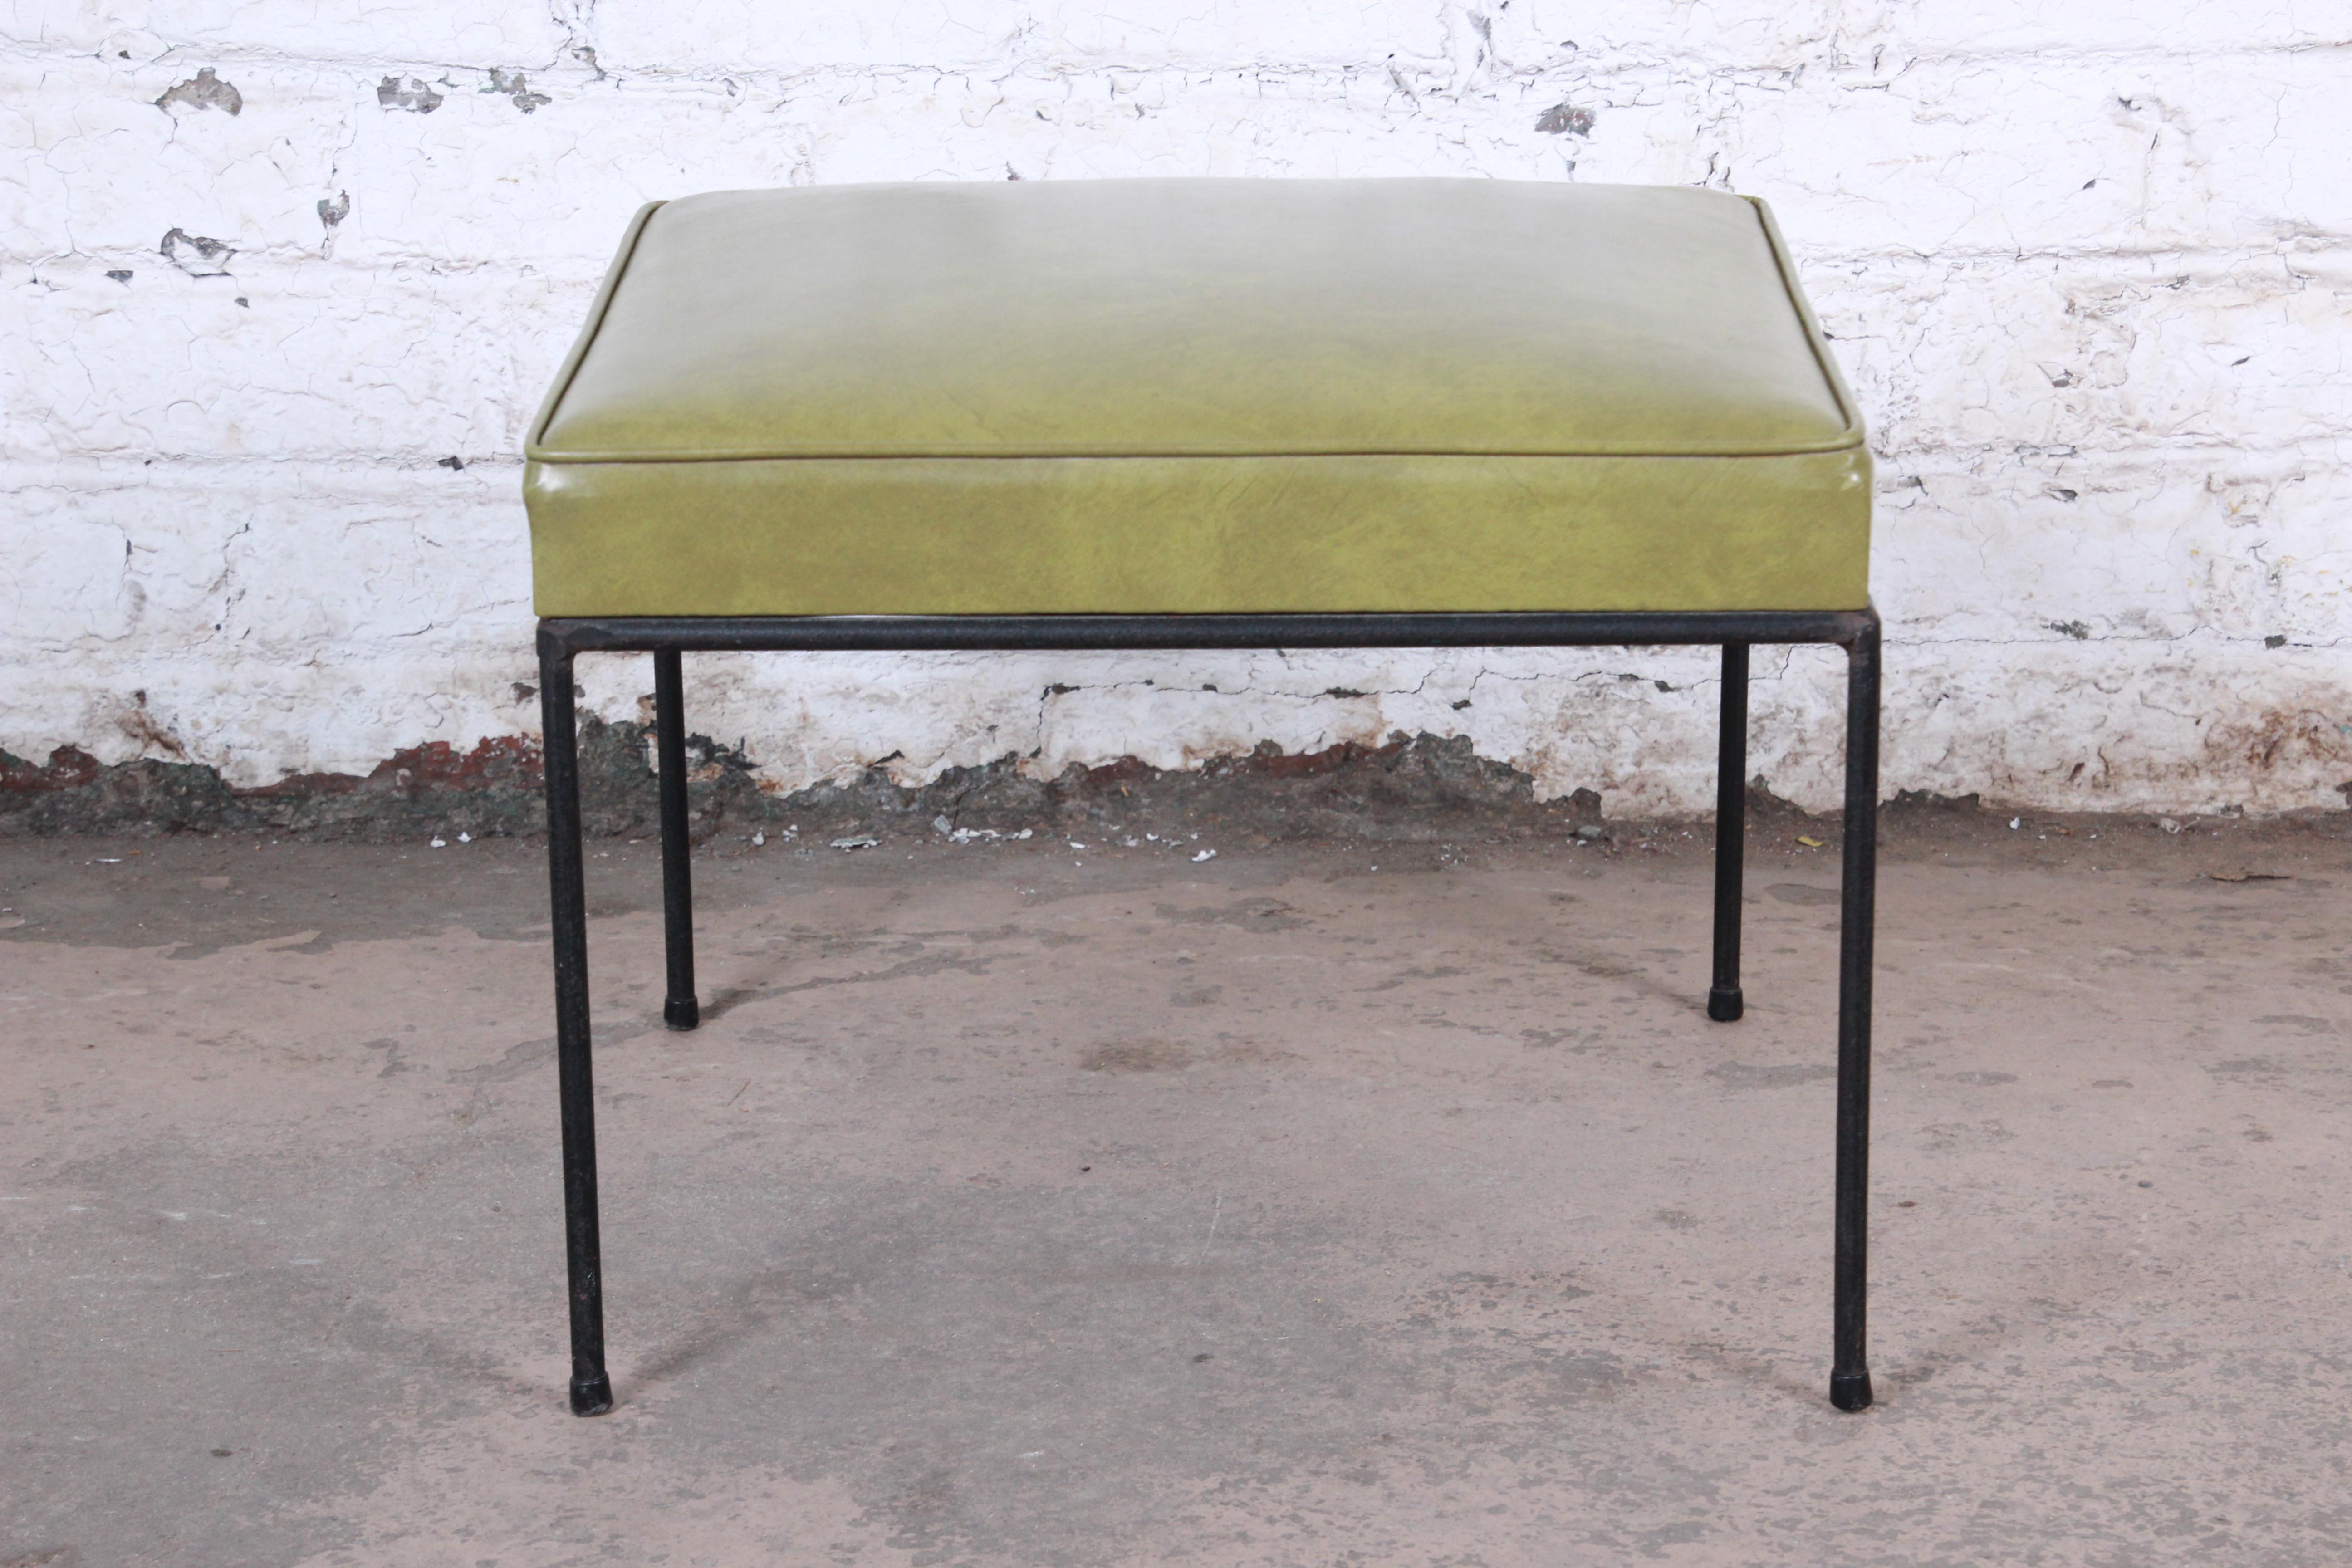 A stylish Mid-Century Modern stool or ottoman designed by Paul McCobb. The stool features nice black iron legs with all feet glides still intact. The green vinyl upholstery is original. An excellent example of McCobb's Minimalist design work. The